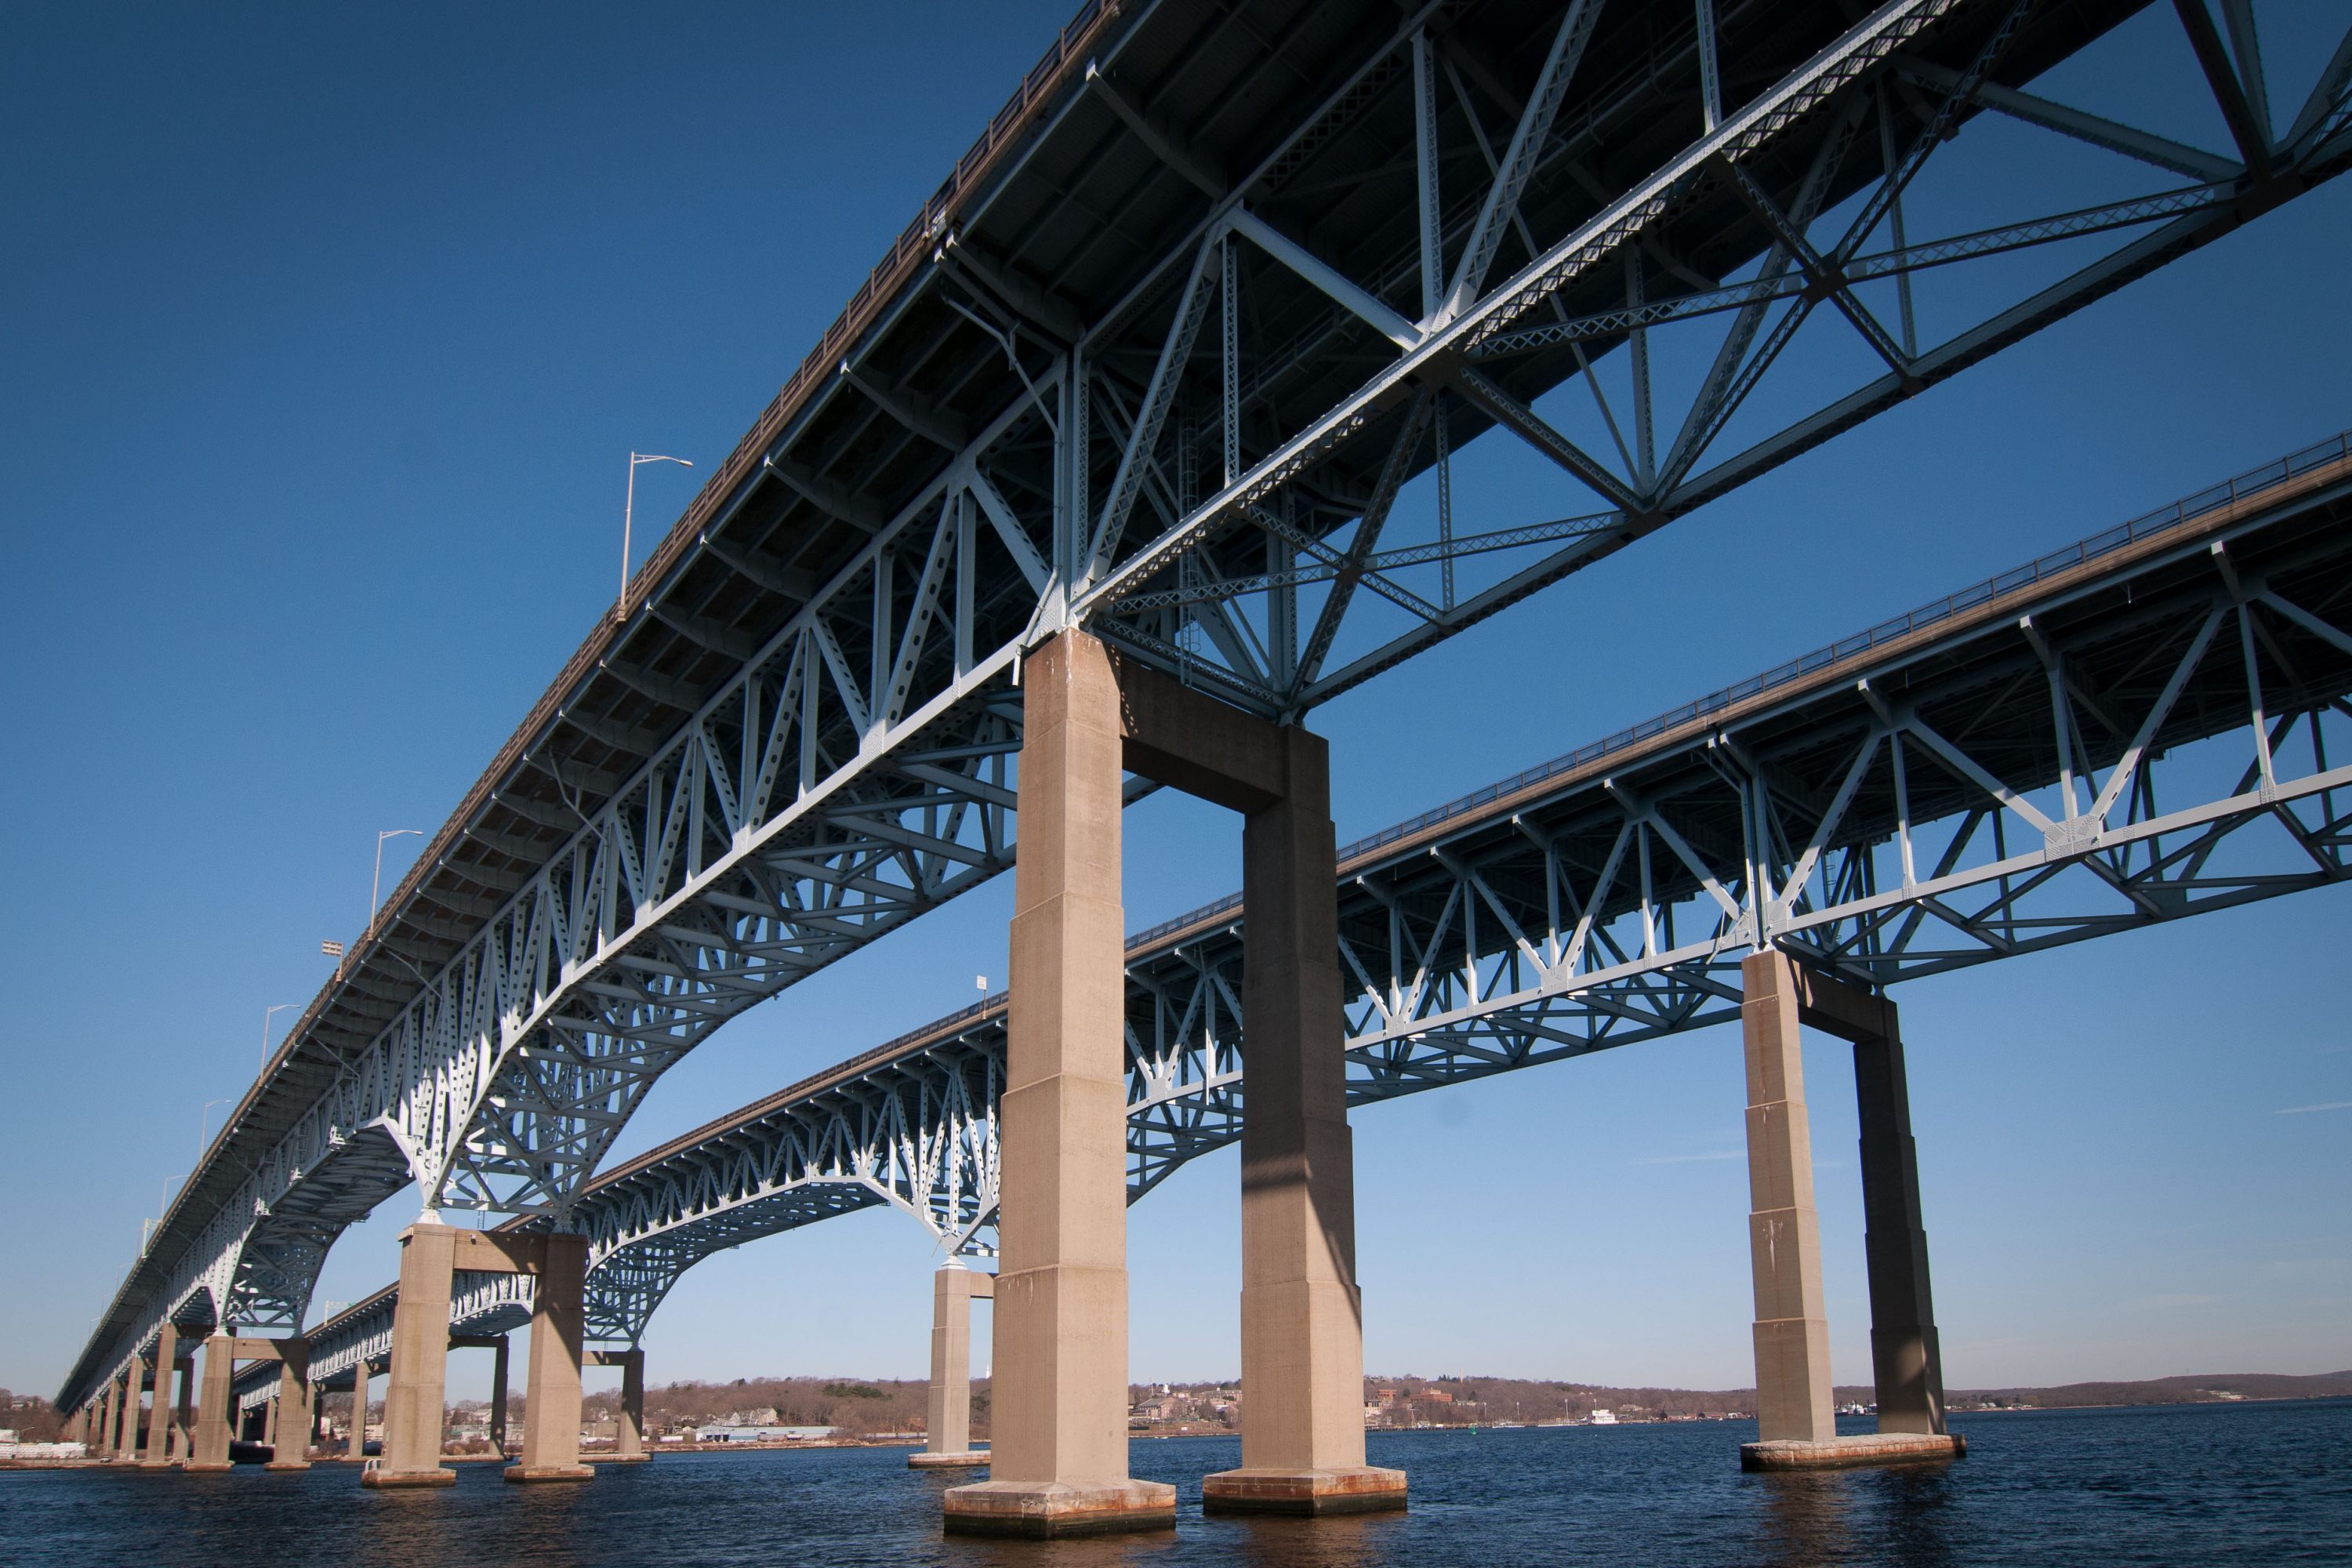 Bridges like this one in Connecticut could benefit from a new repair method developed at UConn using ultra-high performance concrete. Photo courtesy of Peter Morenus, UConn